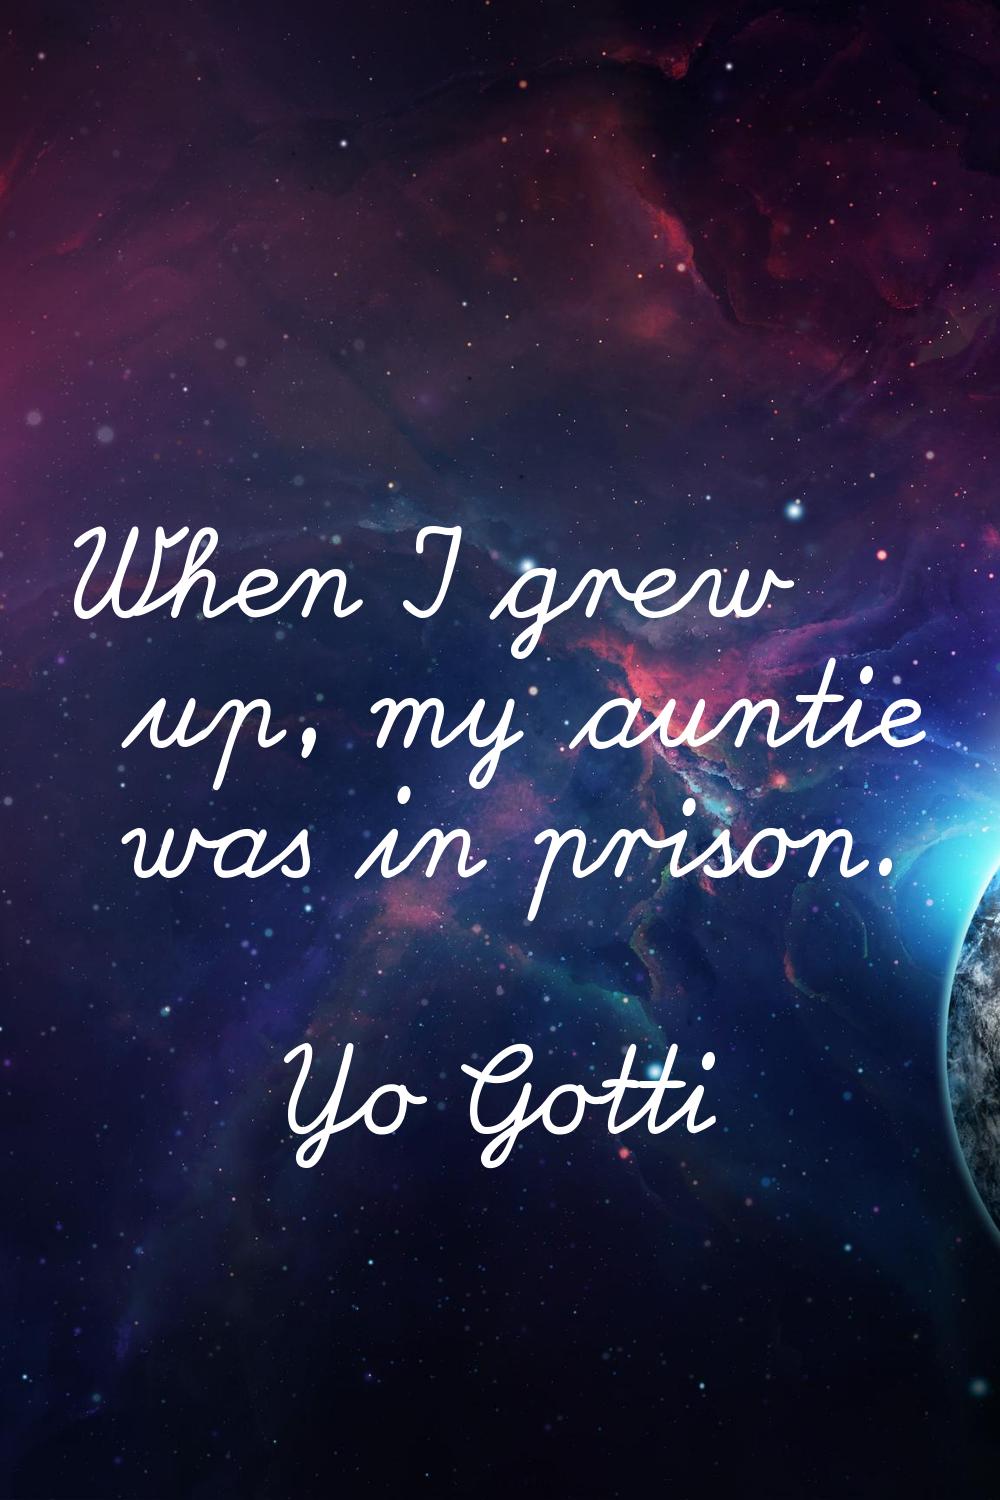 When I grew up, my auntie was in prison.